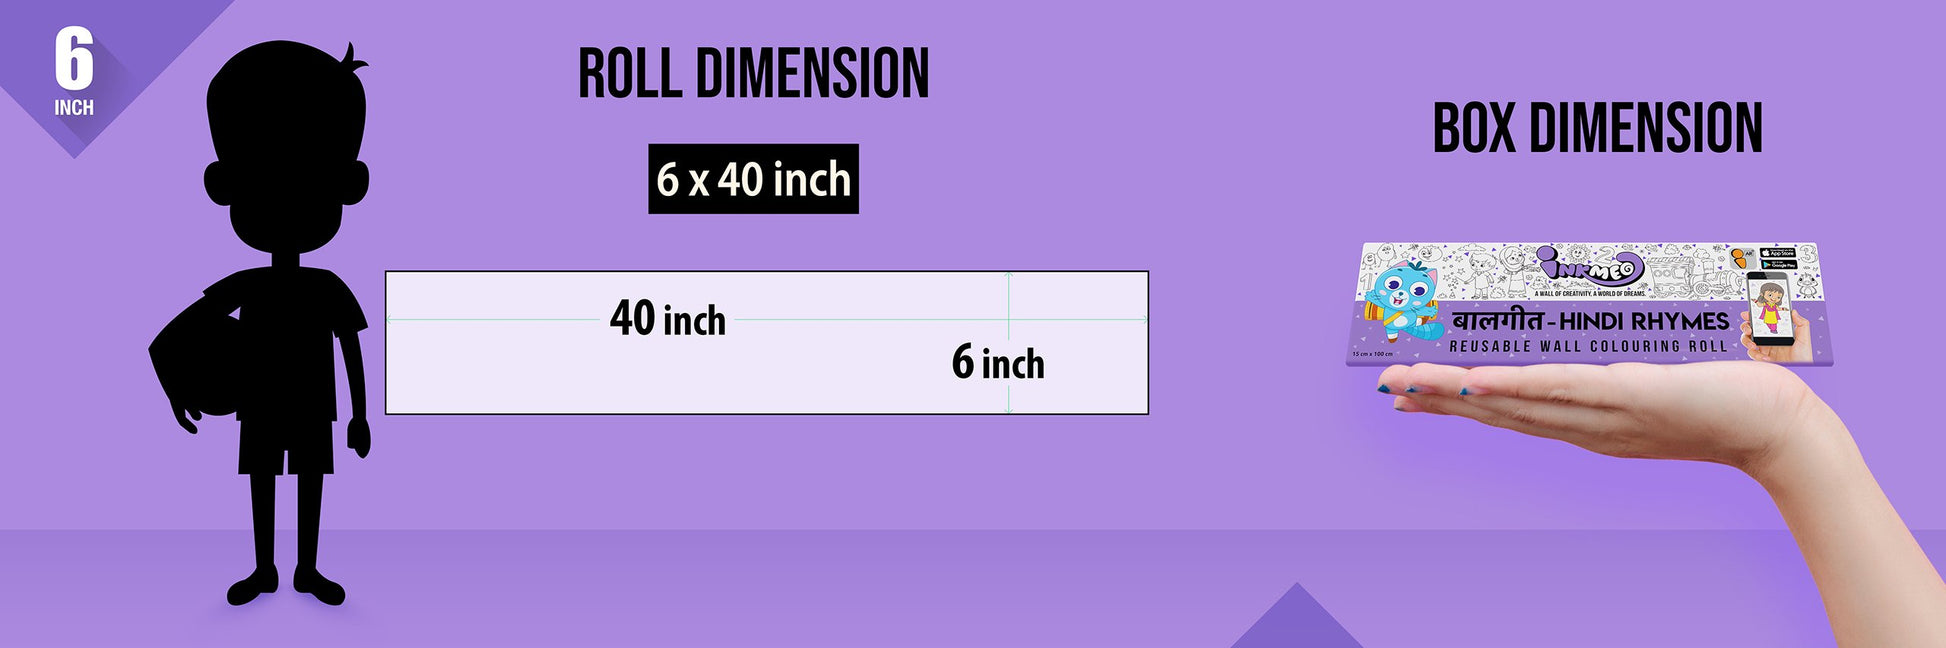  The image depicts a lavender background with a ruler showing a child's height next to a 6*40 inches paper roll attached to the wall, alongside a picture of a box dimension.